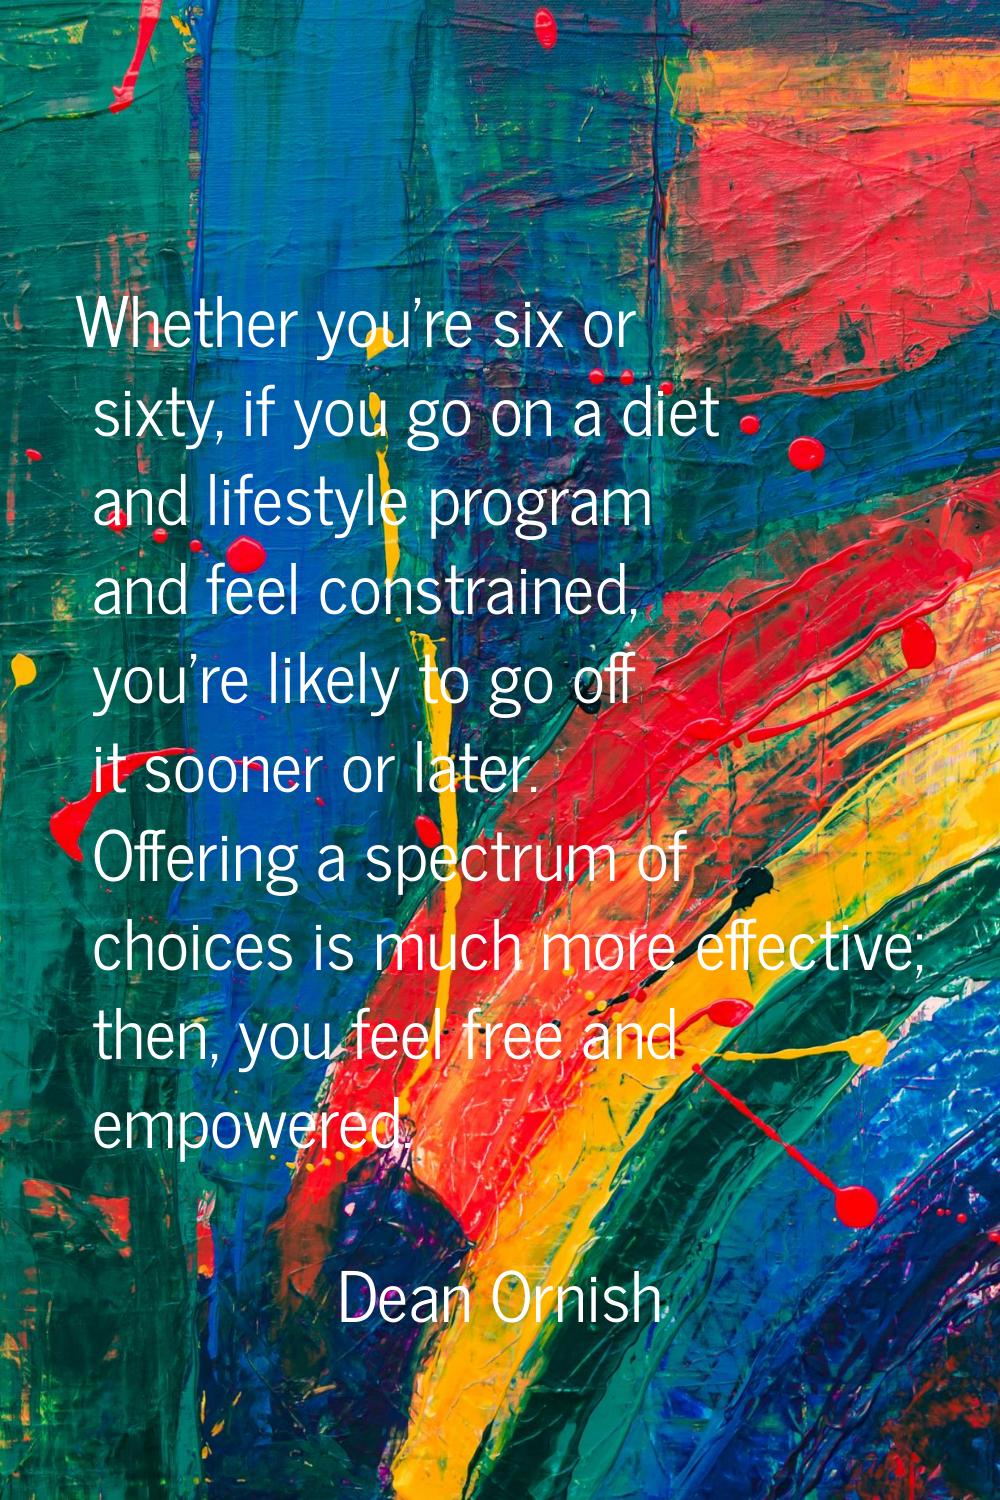 Whether you're six or sixty, if you go on a diet and lifestyle program and feel constrained, you're